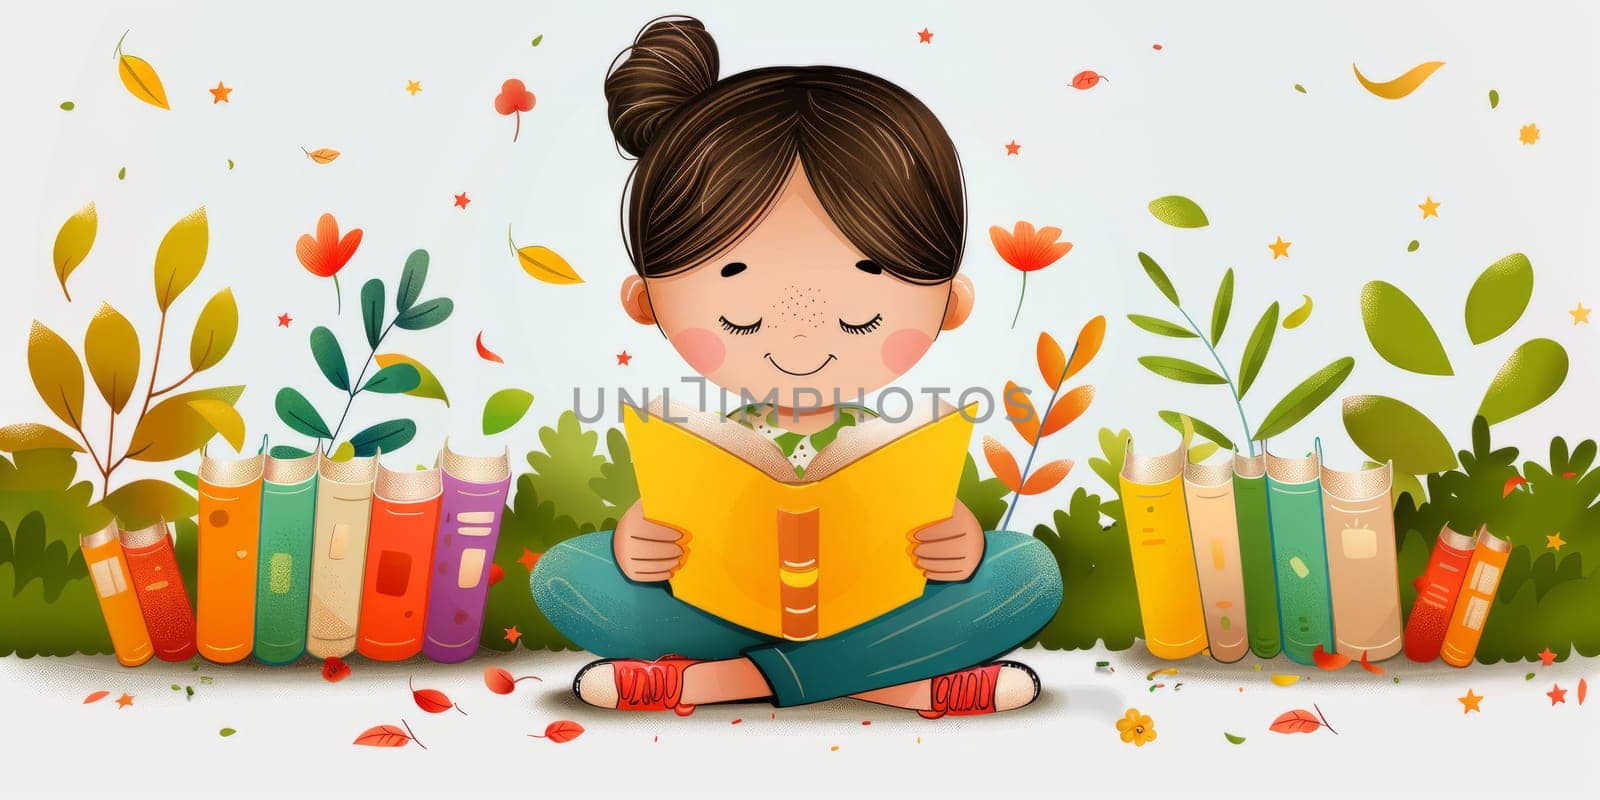 Cute little girl reading book surrounded by books and autumn leaves. Concept of education, reading, learning, and seasonal fall. by ailike